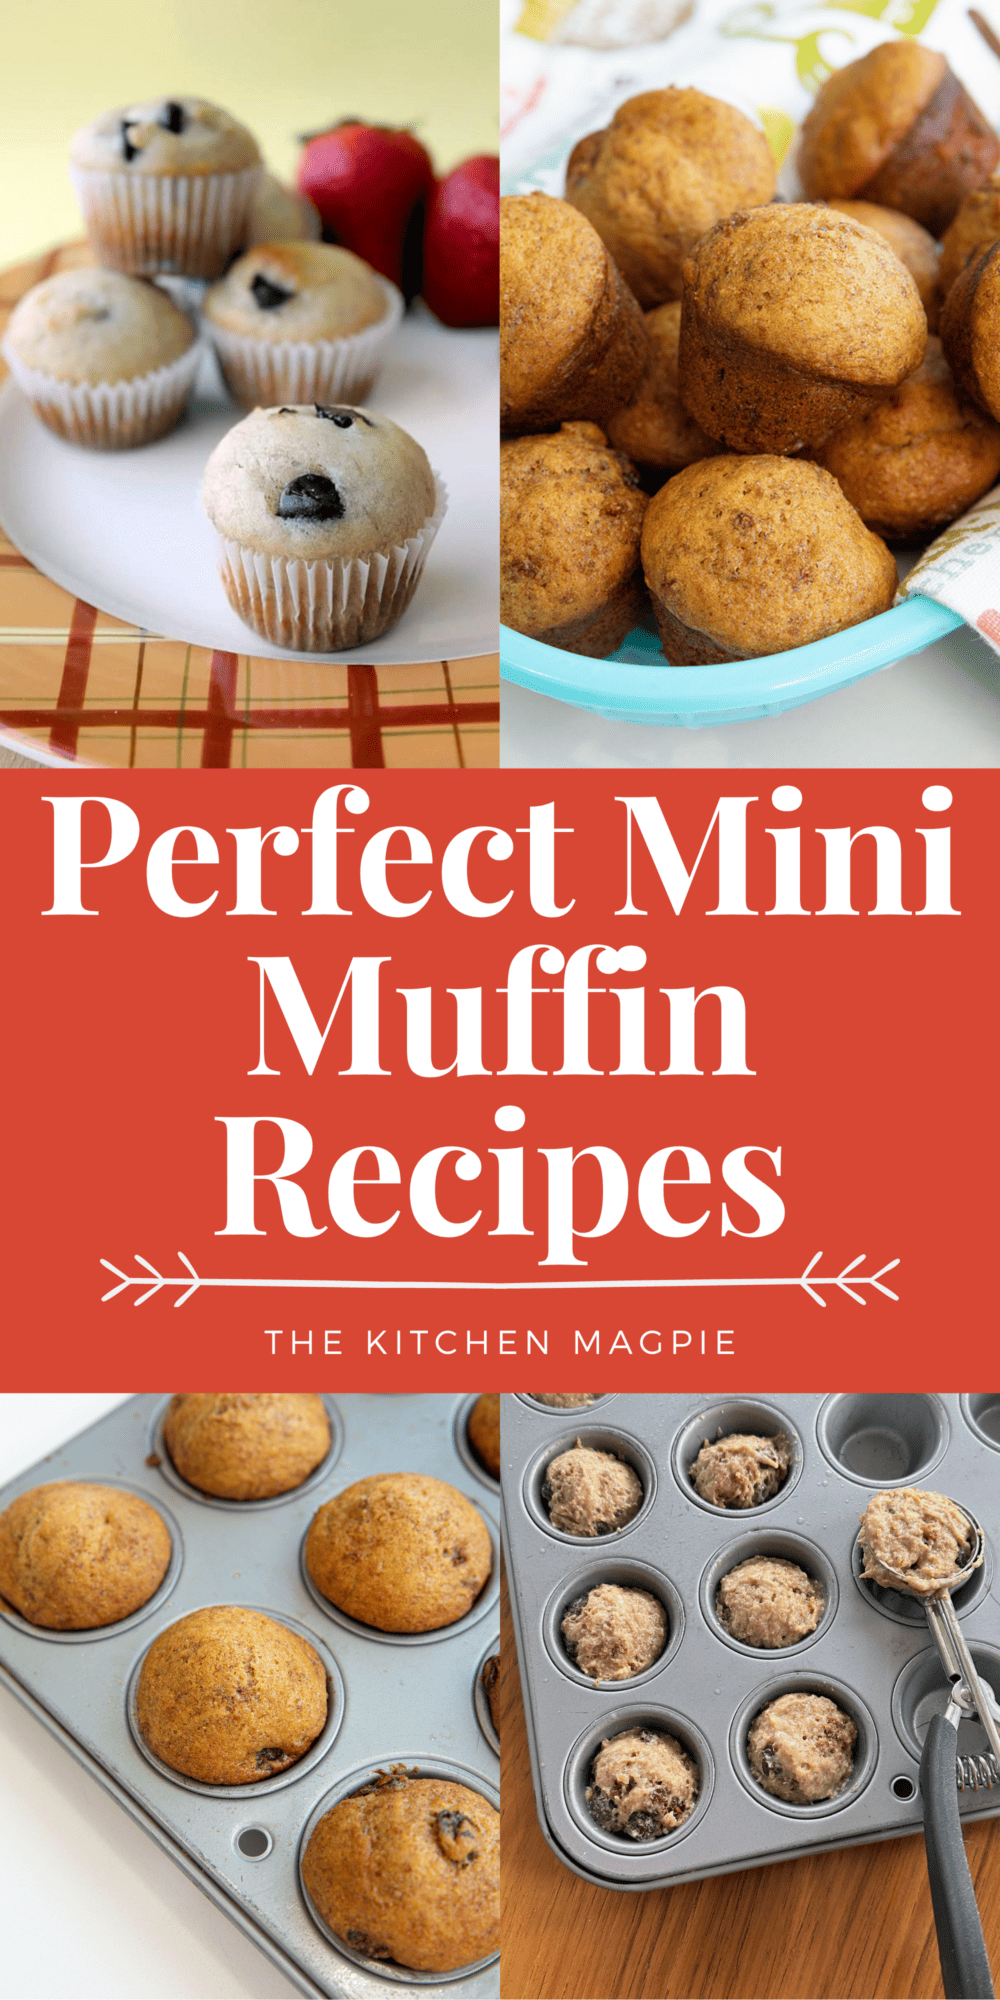 My tips and tricks for making the best mini muffins - with my delicious banana chocolate chip mini muffin recipe!  